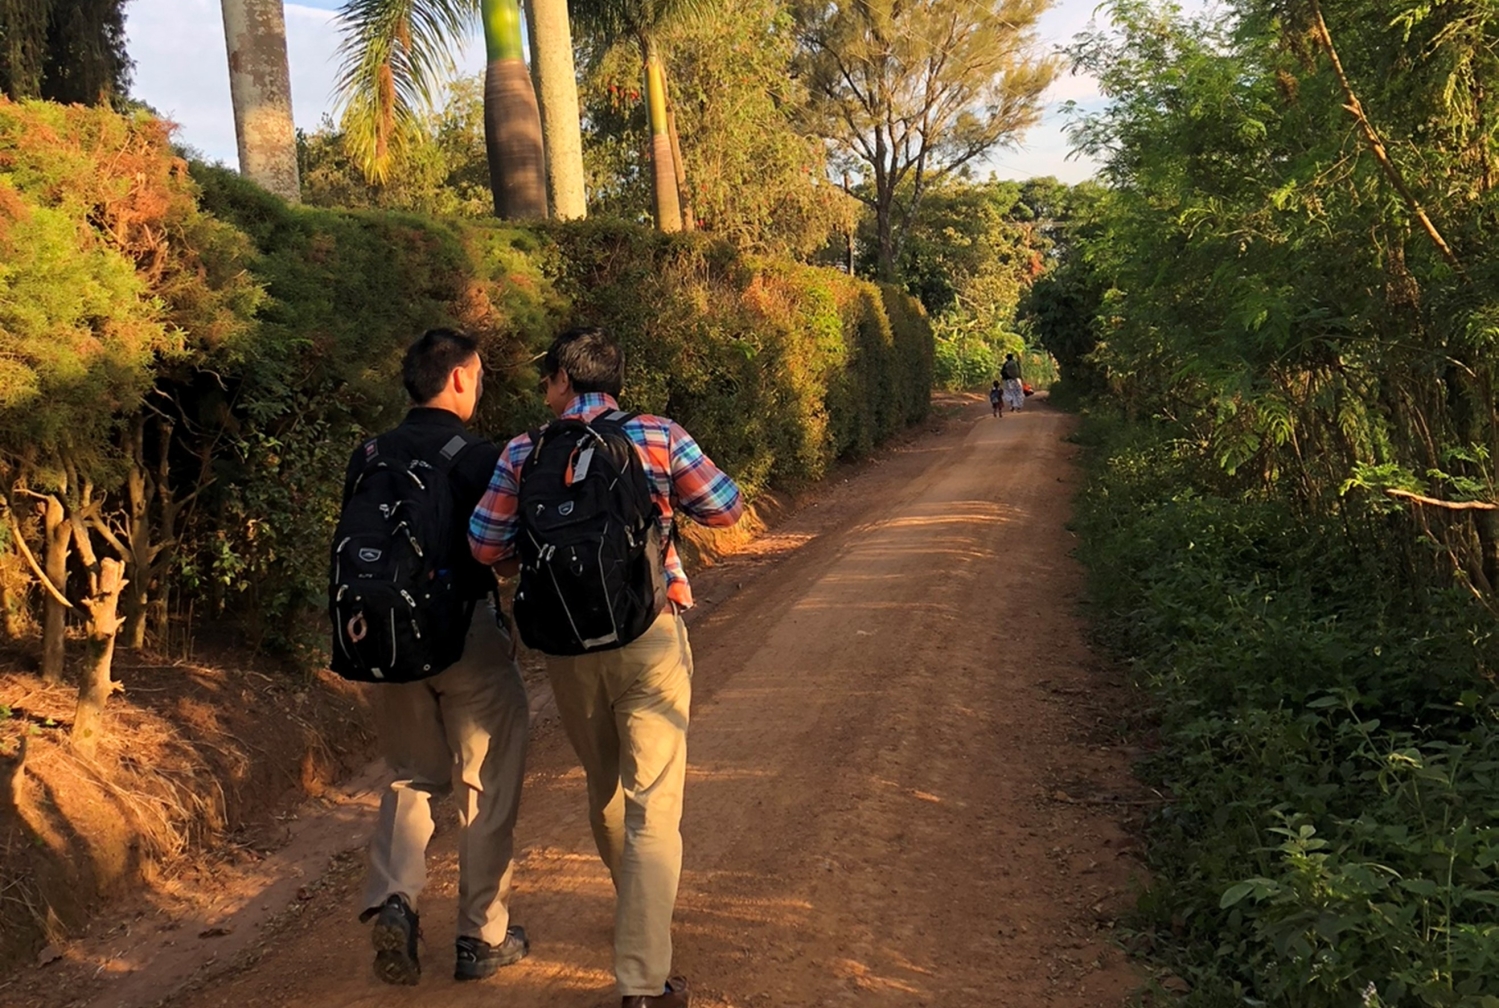 two men walk together down a dirt path